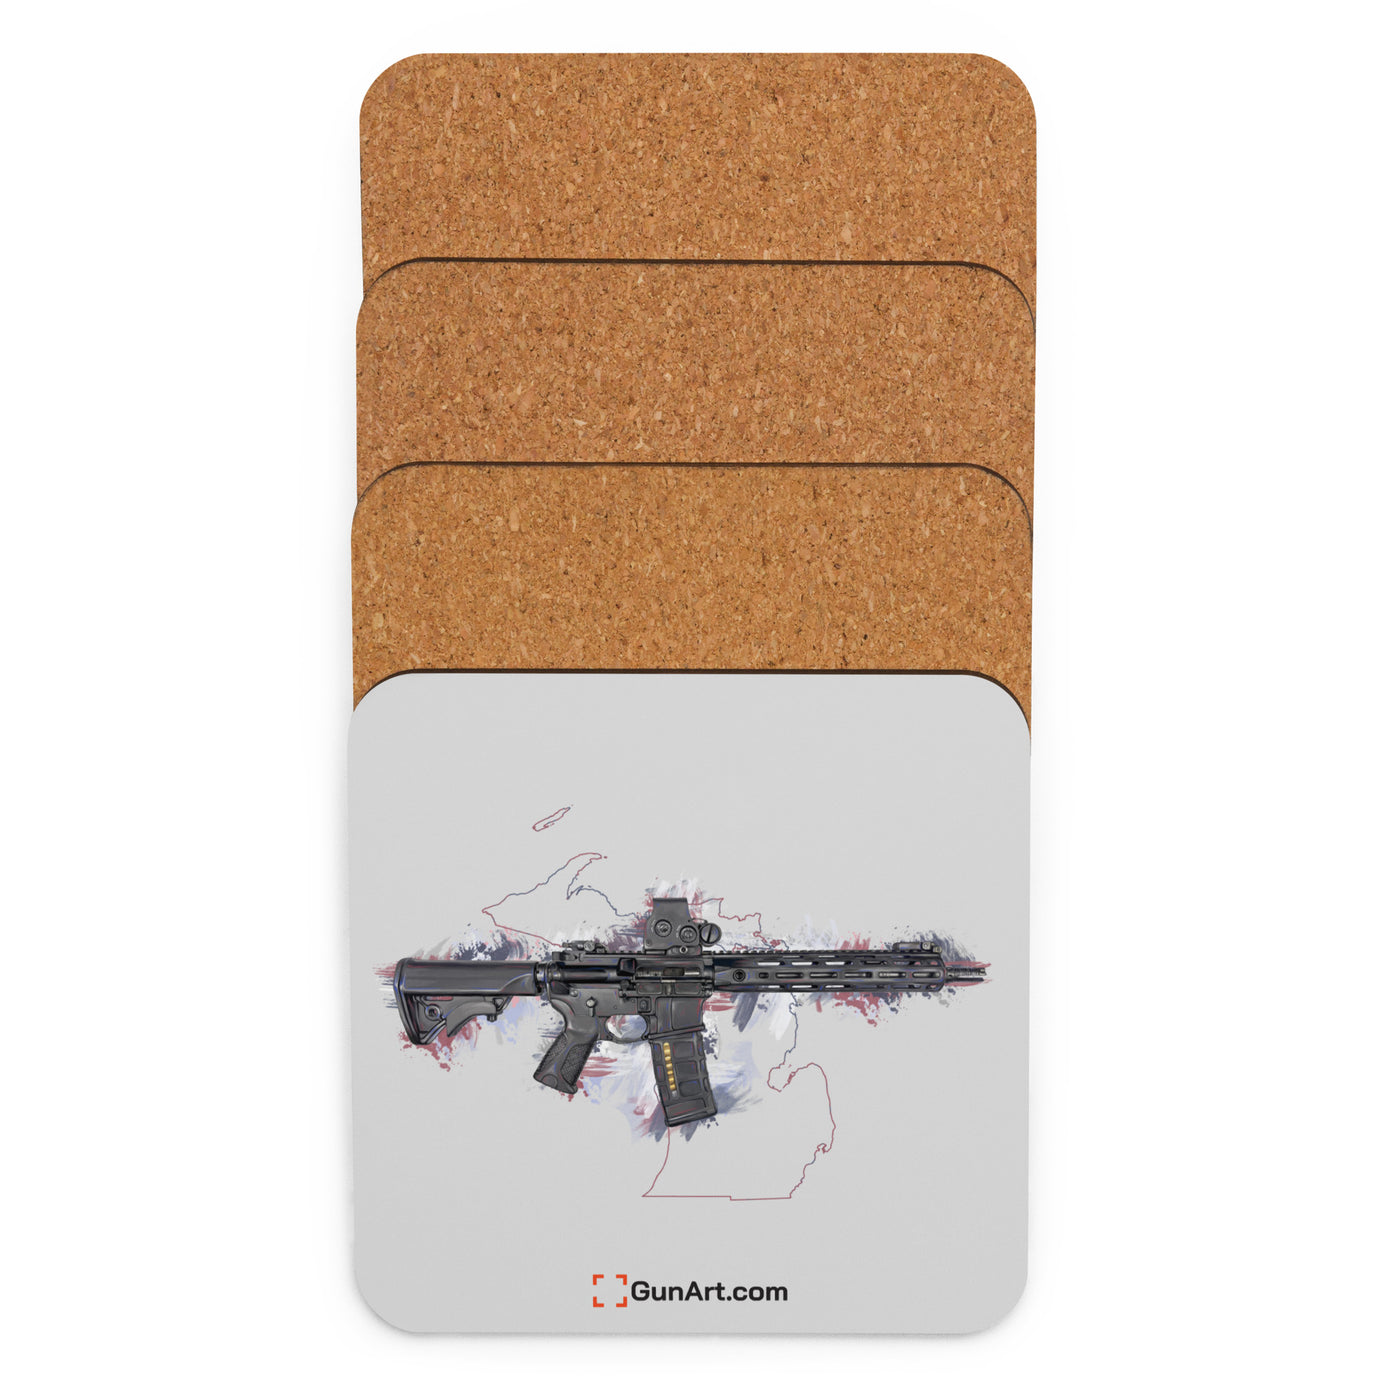 Defending Freedom - Michigan - AR-15 State Cork-back Coaster - Colored State